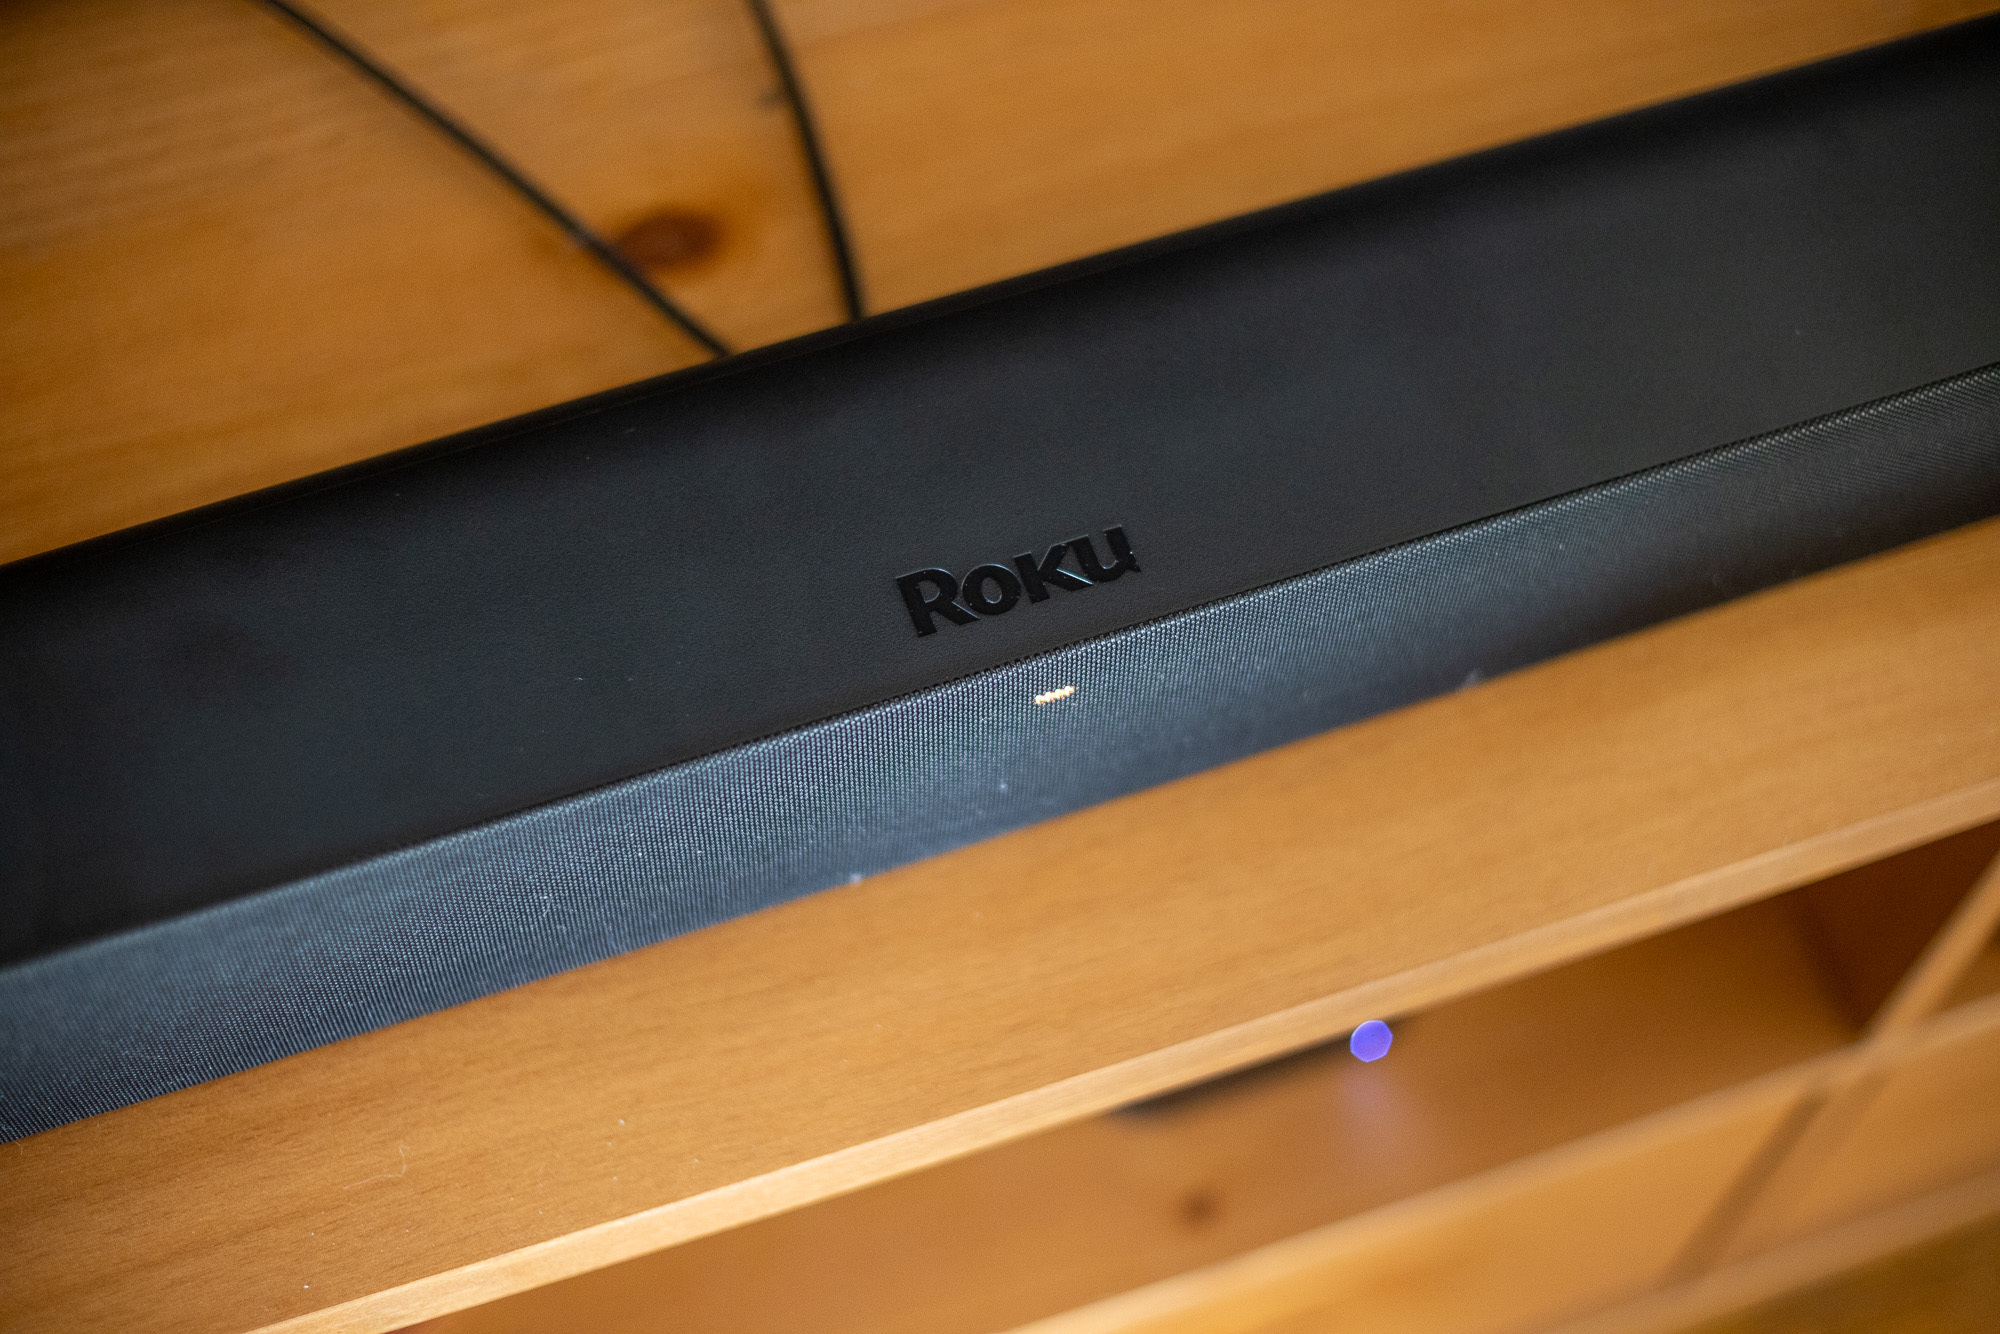 Stan's Roku Stream bar Pro sitting on a brown cabinet